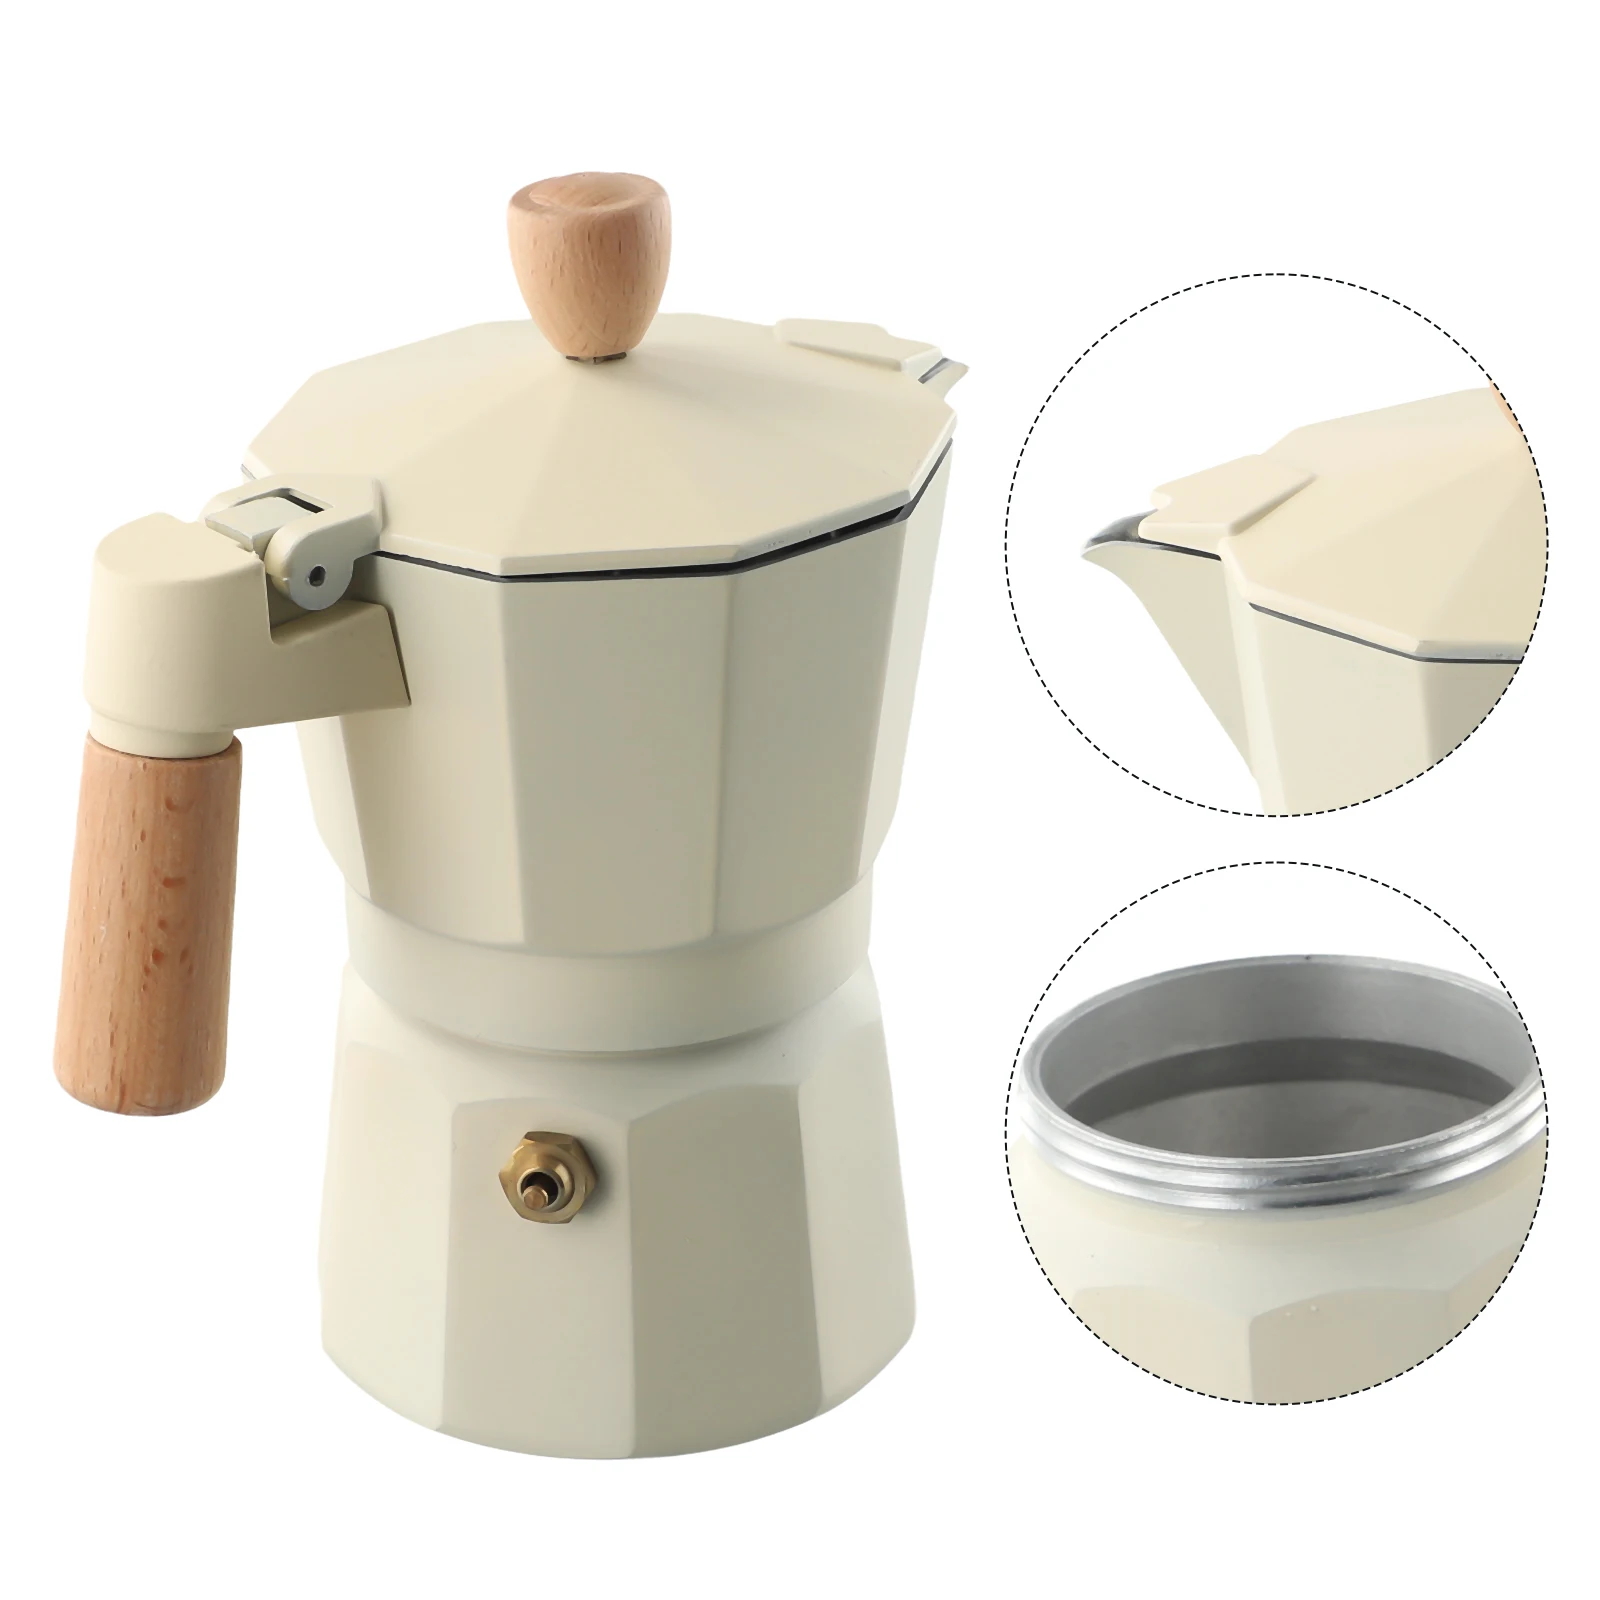 https://ae01.alicdn.com/kf/S9330ff90ce554533ad0fcde4853d9b1be/Moka-Pot-Stovetop-Espresso-Maker-3-6-Cup-Coffee-Maker-With-Solid-Wood-Handle-Classic-Italian.jpeg